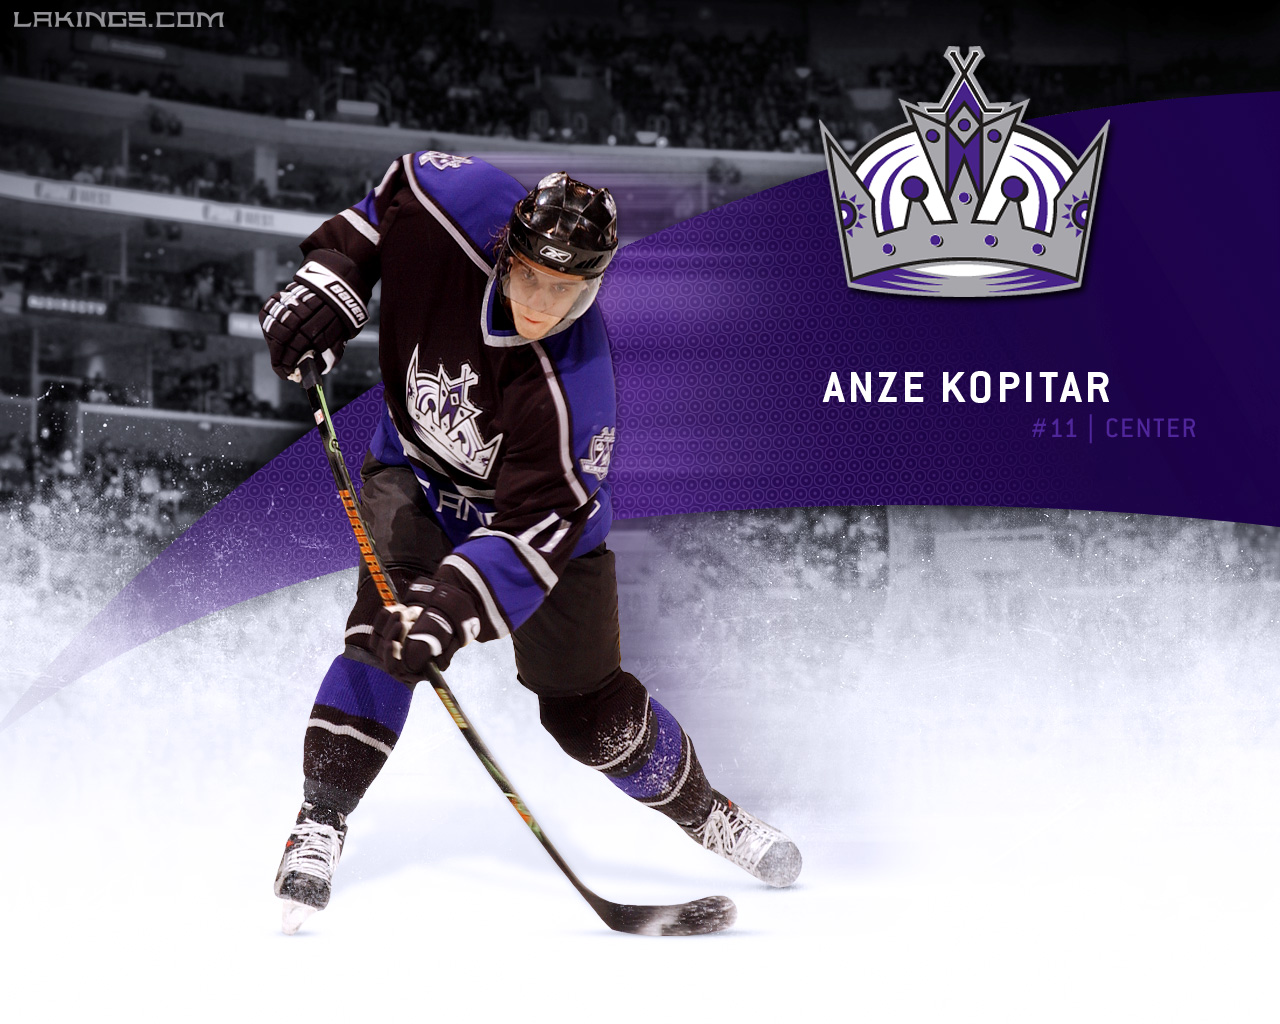 Los Angeles Kings Or Even Videos Related To